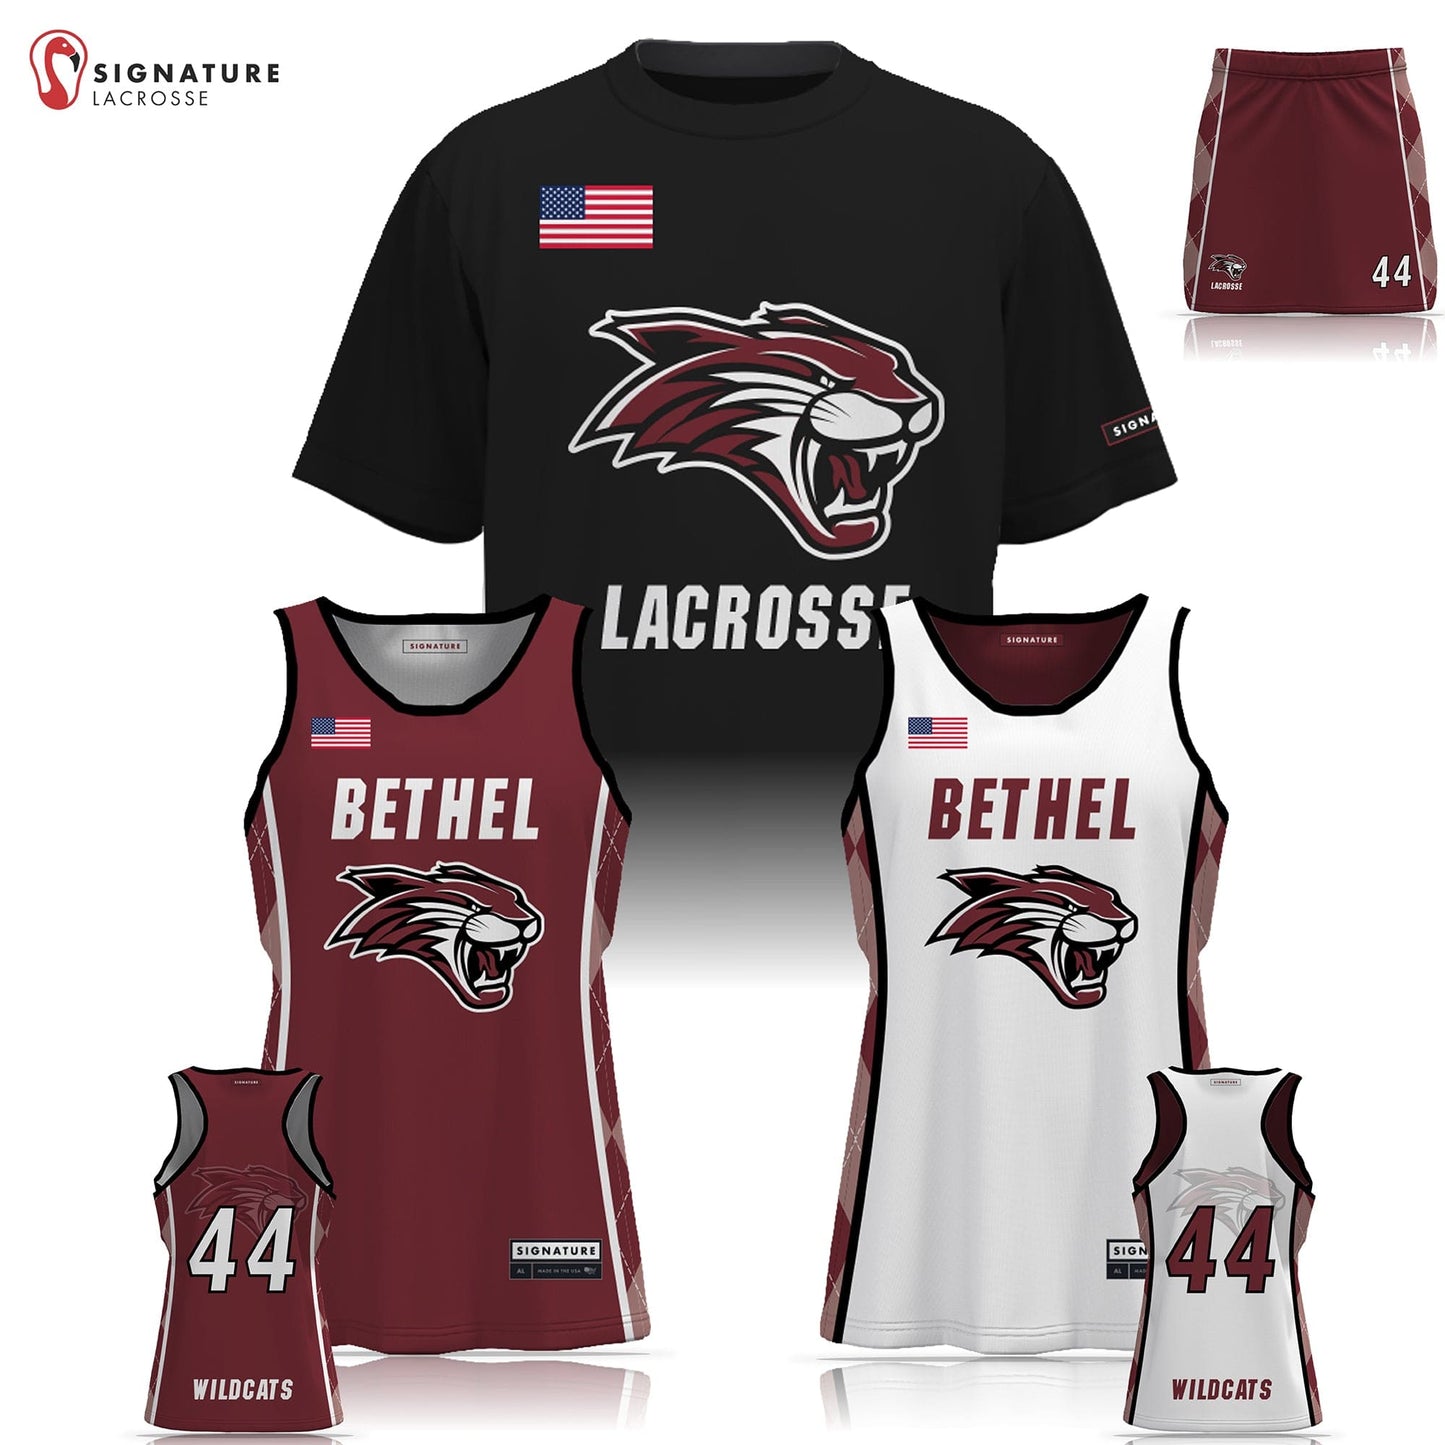 Bethel Youth Lacrosse Women's 3 Piece Game Package - Basic 2.0 - S/S Shooter Shirt:Girls Lightening Signature Lacrosse